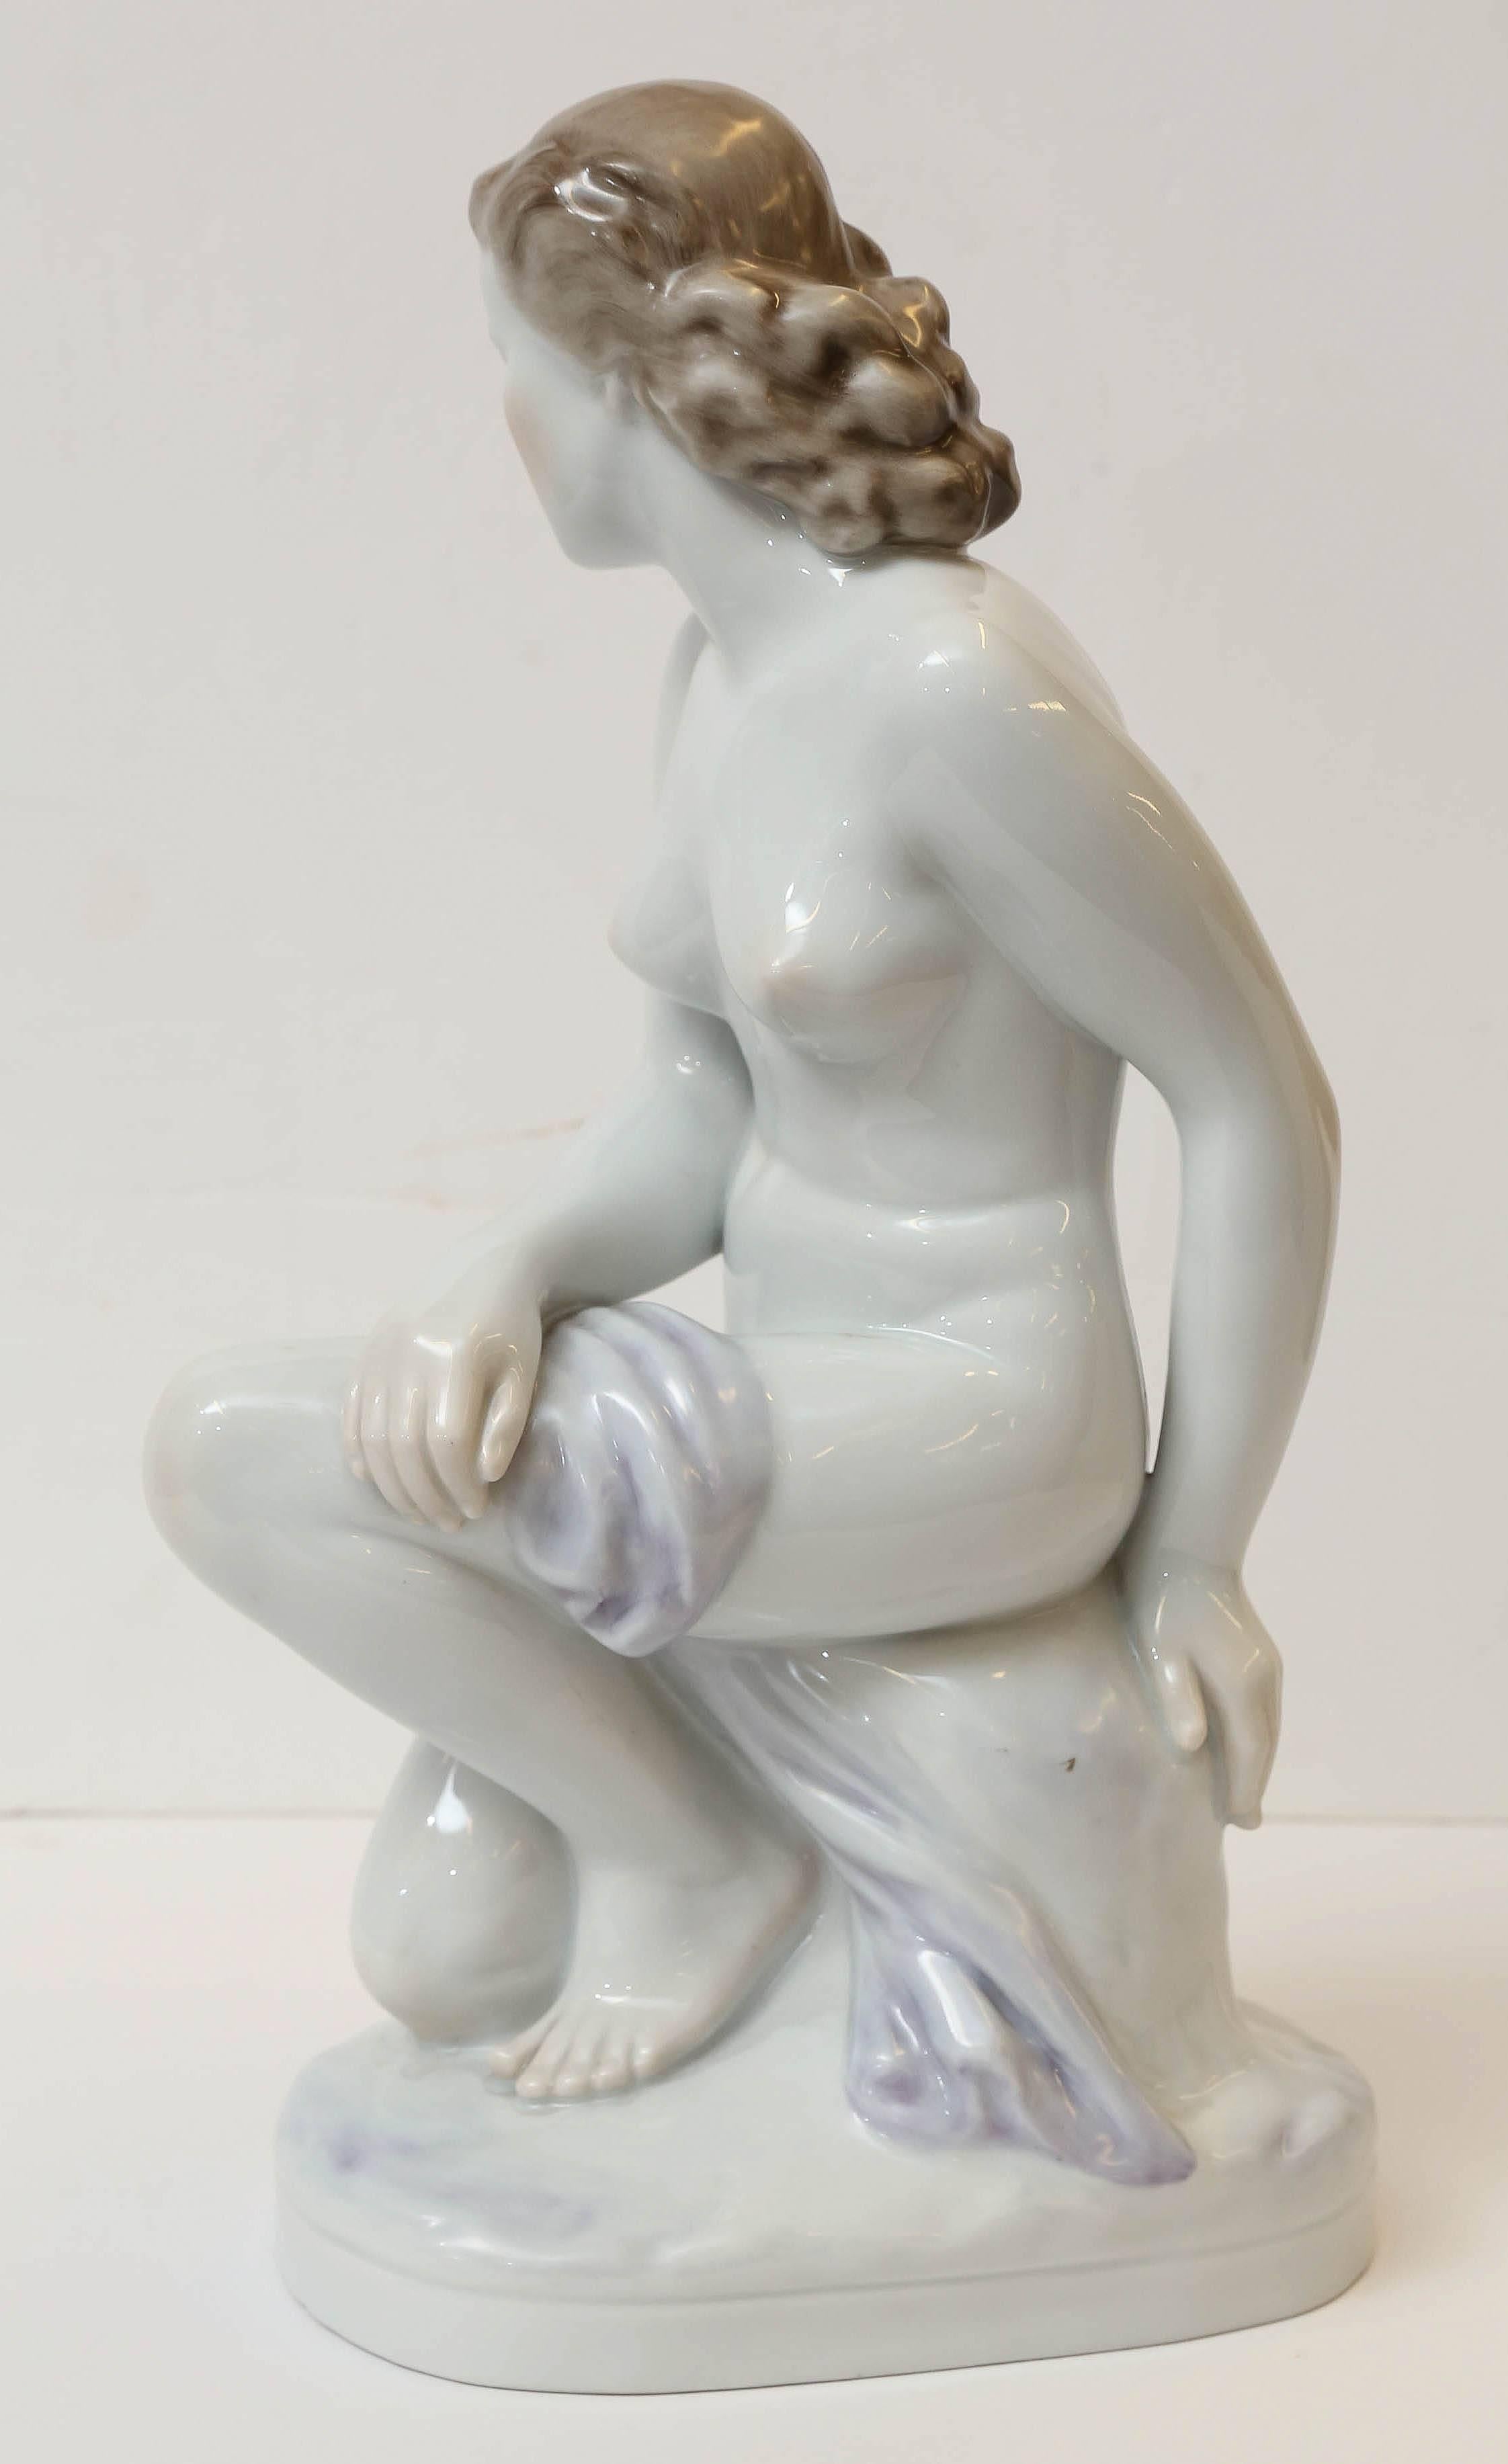 Herend female nude figure, hand-painted. # 7719.
Condition is perfect, circa 1960s.